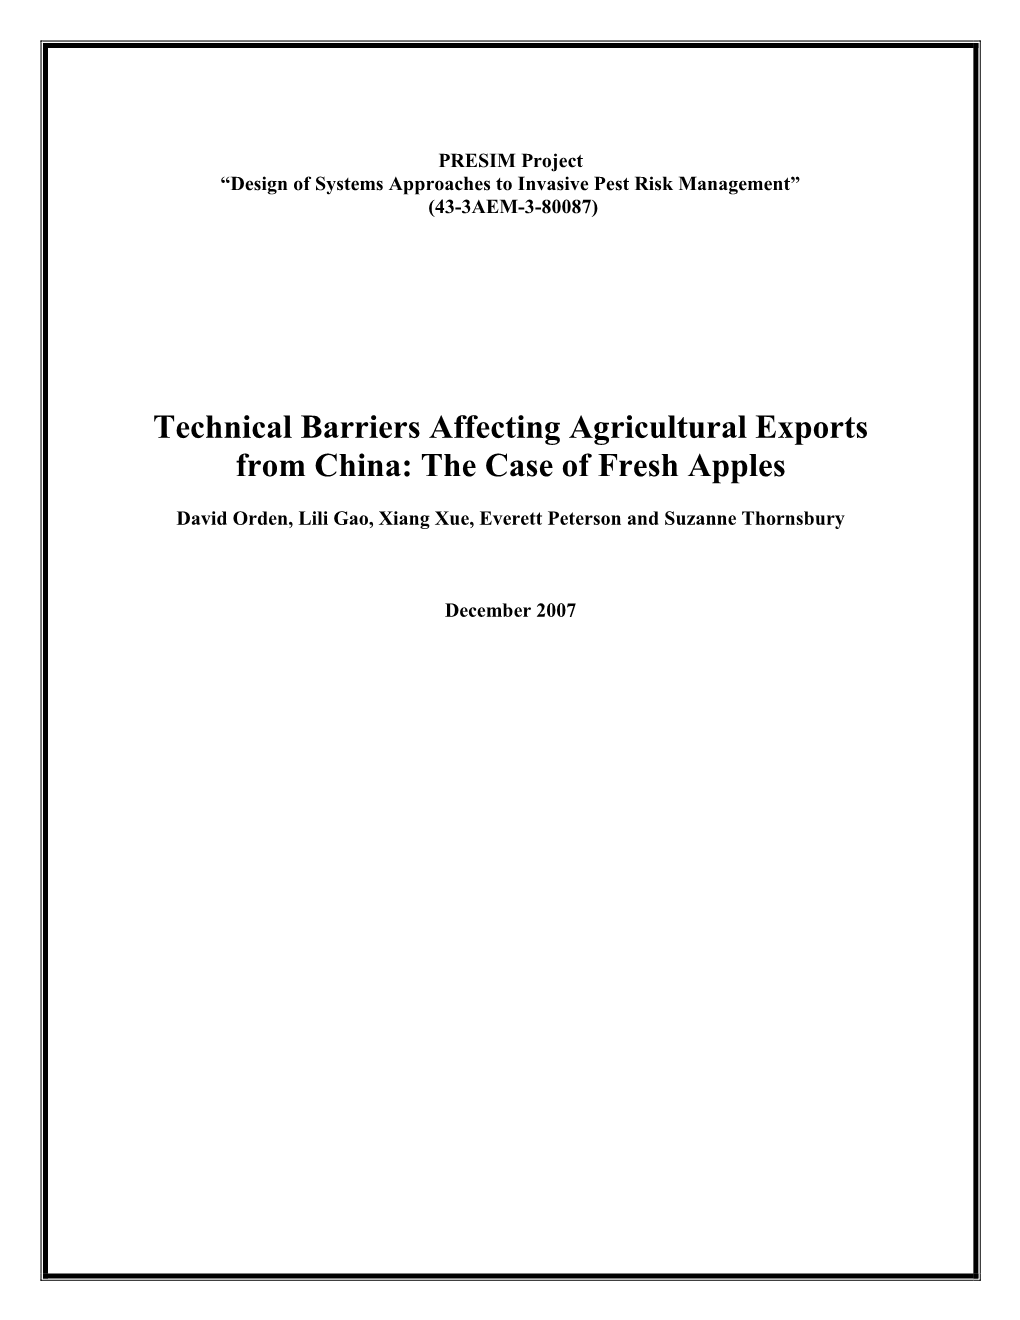 Technical Barriers Affecting Agricultural Exports from China: the Case of Fresh Apples